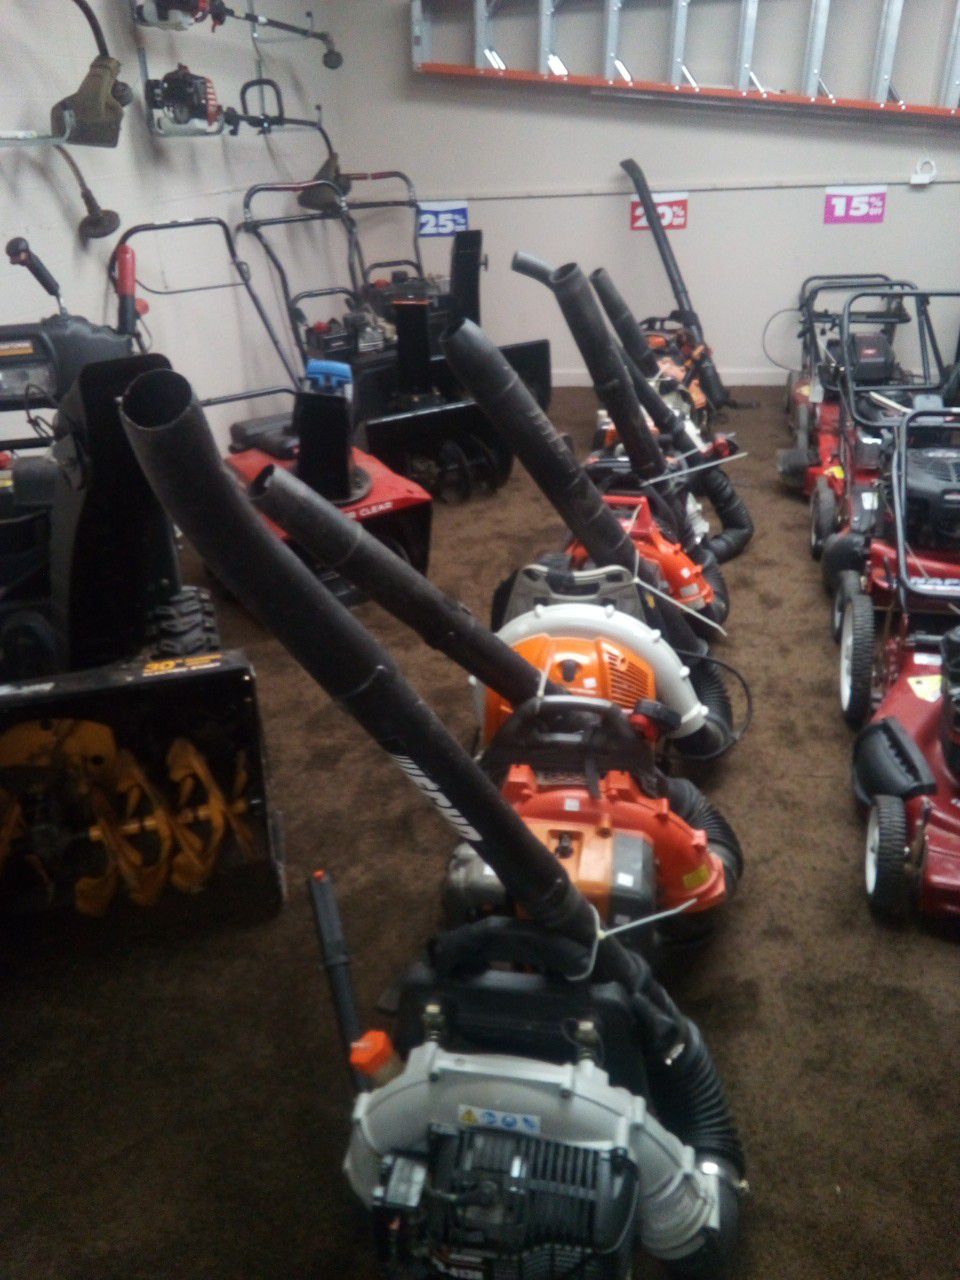 Blower all kinds Stihl Echo 175$ n up lawnmower self-propelled 150$